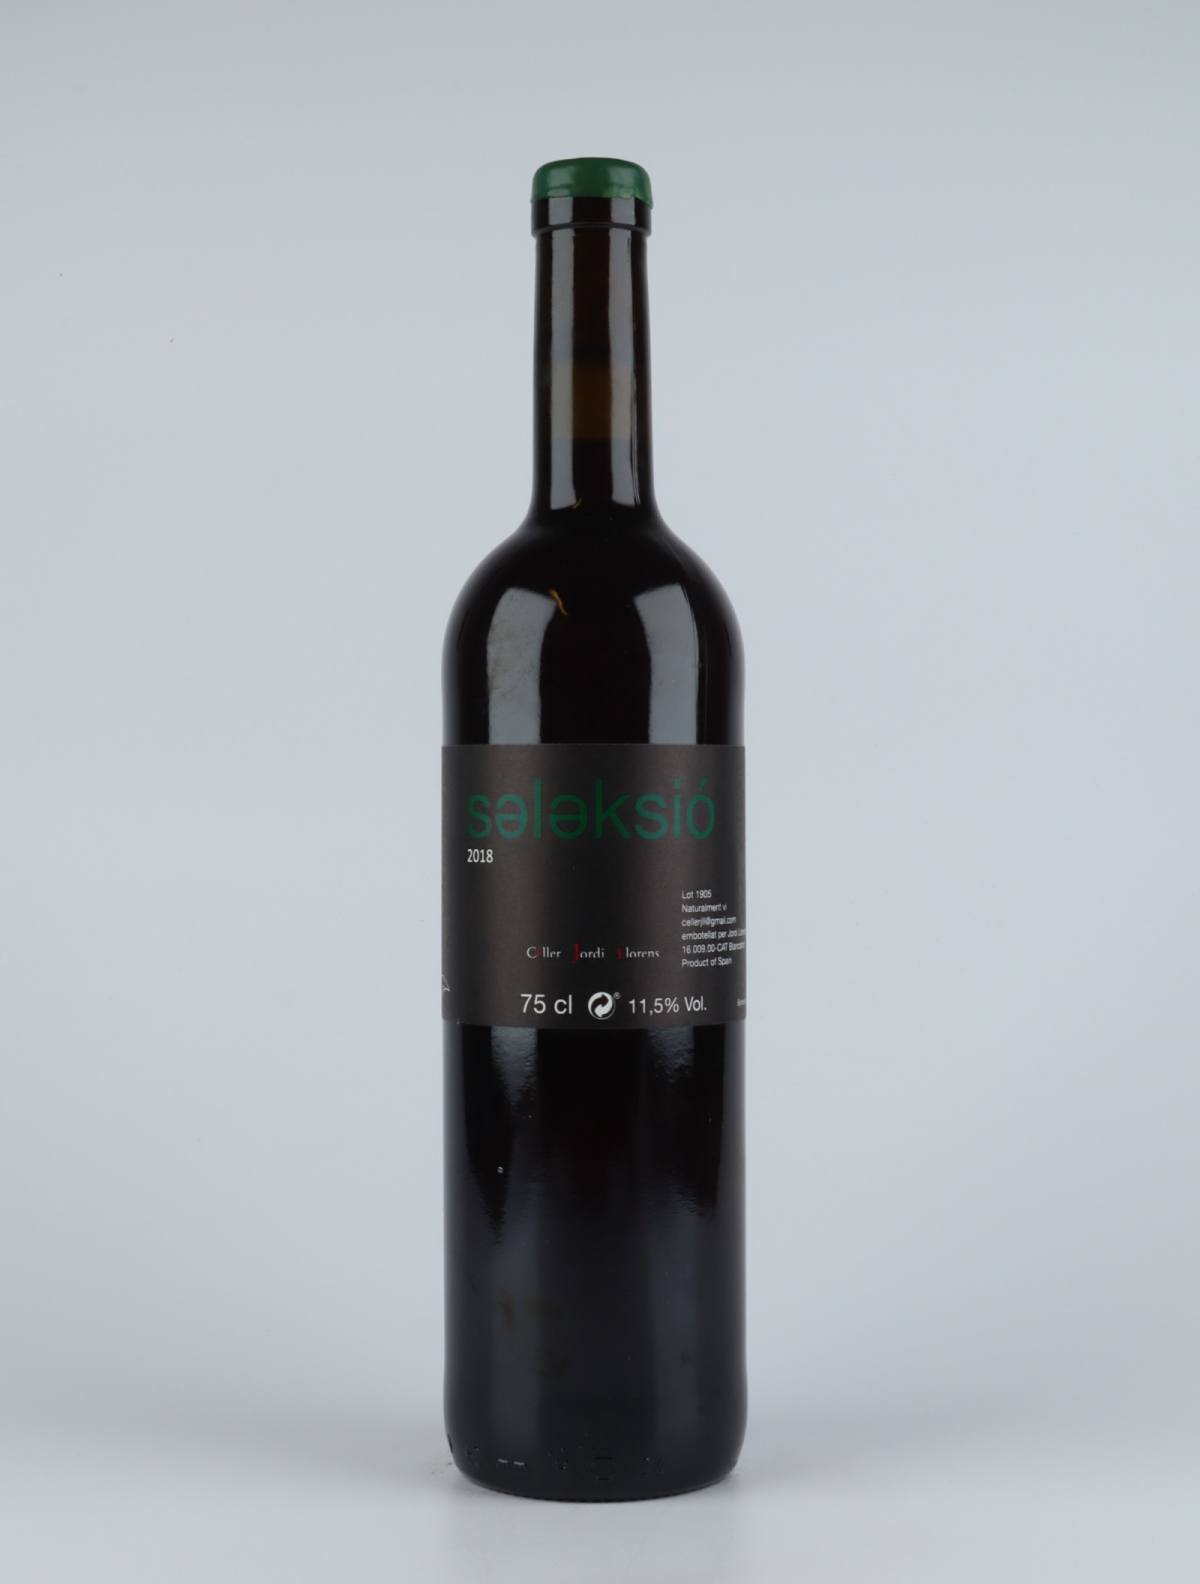 A bottle 2018 Salaksio Red wine from Jordi Llorens, Catalonia in Spain